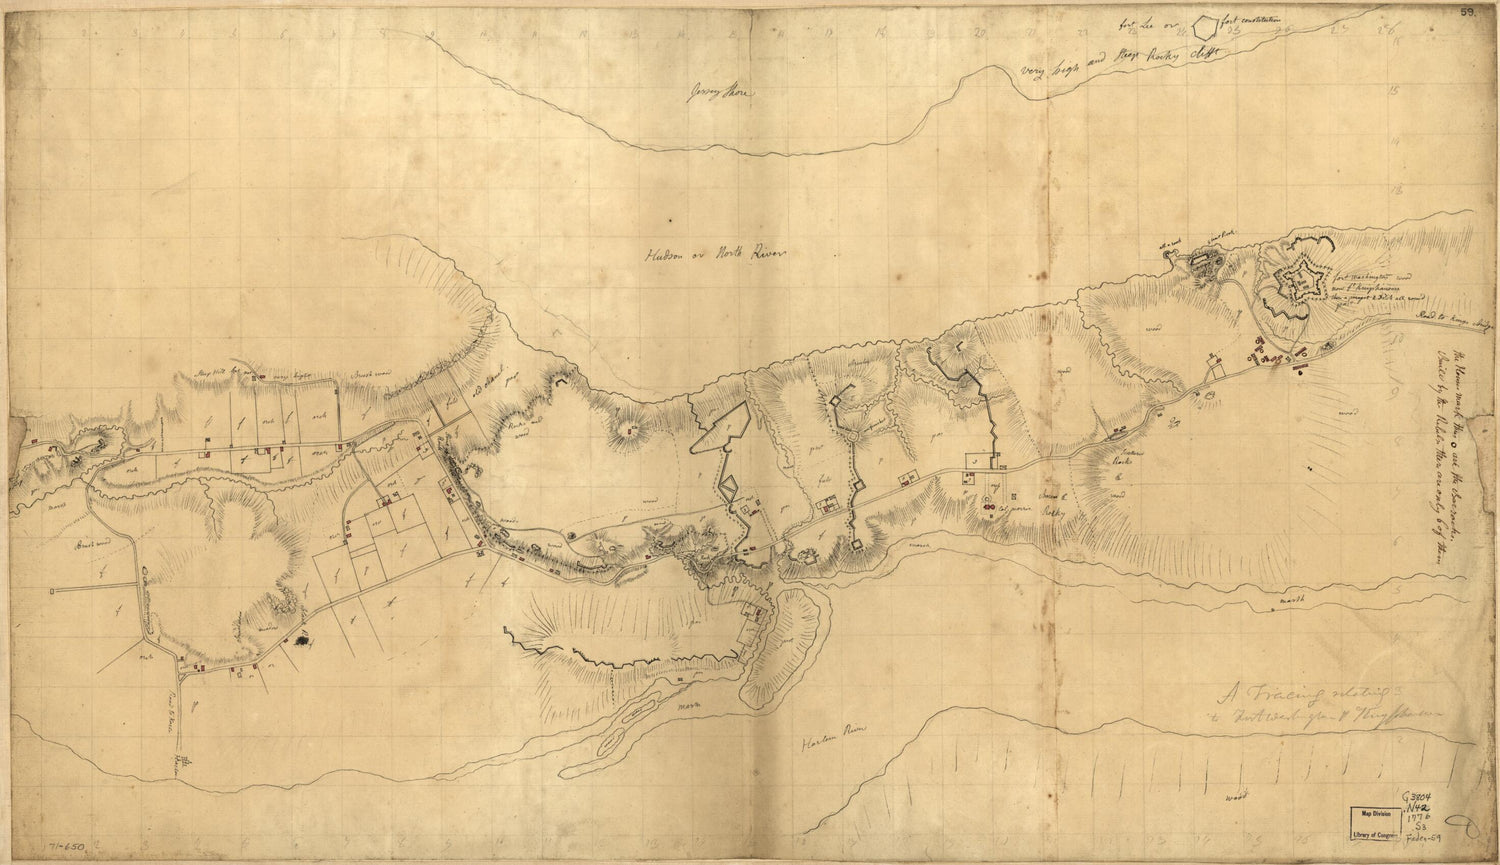 This old map of A Tracing Relating to Fort Washington Or Knyphausen from 1776 was created by Claude Joseph Sauthier in 1776